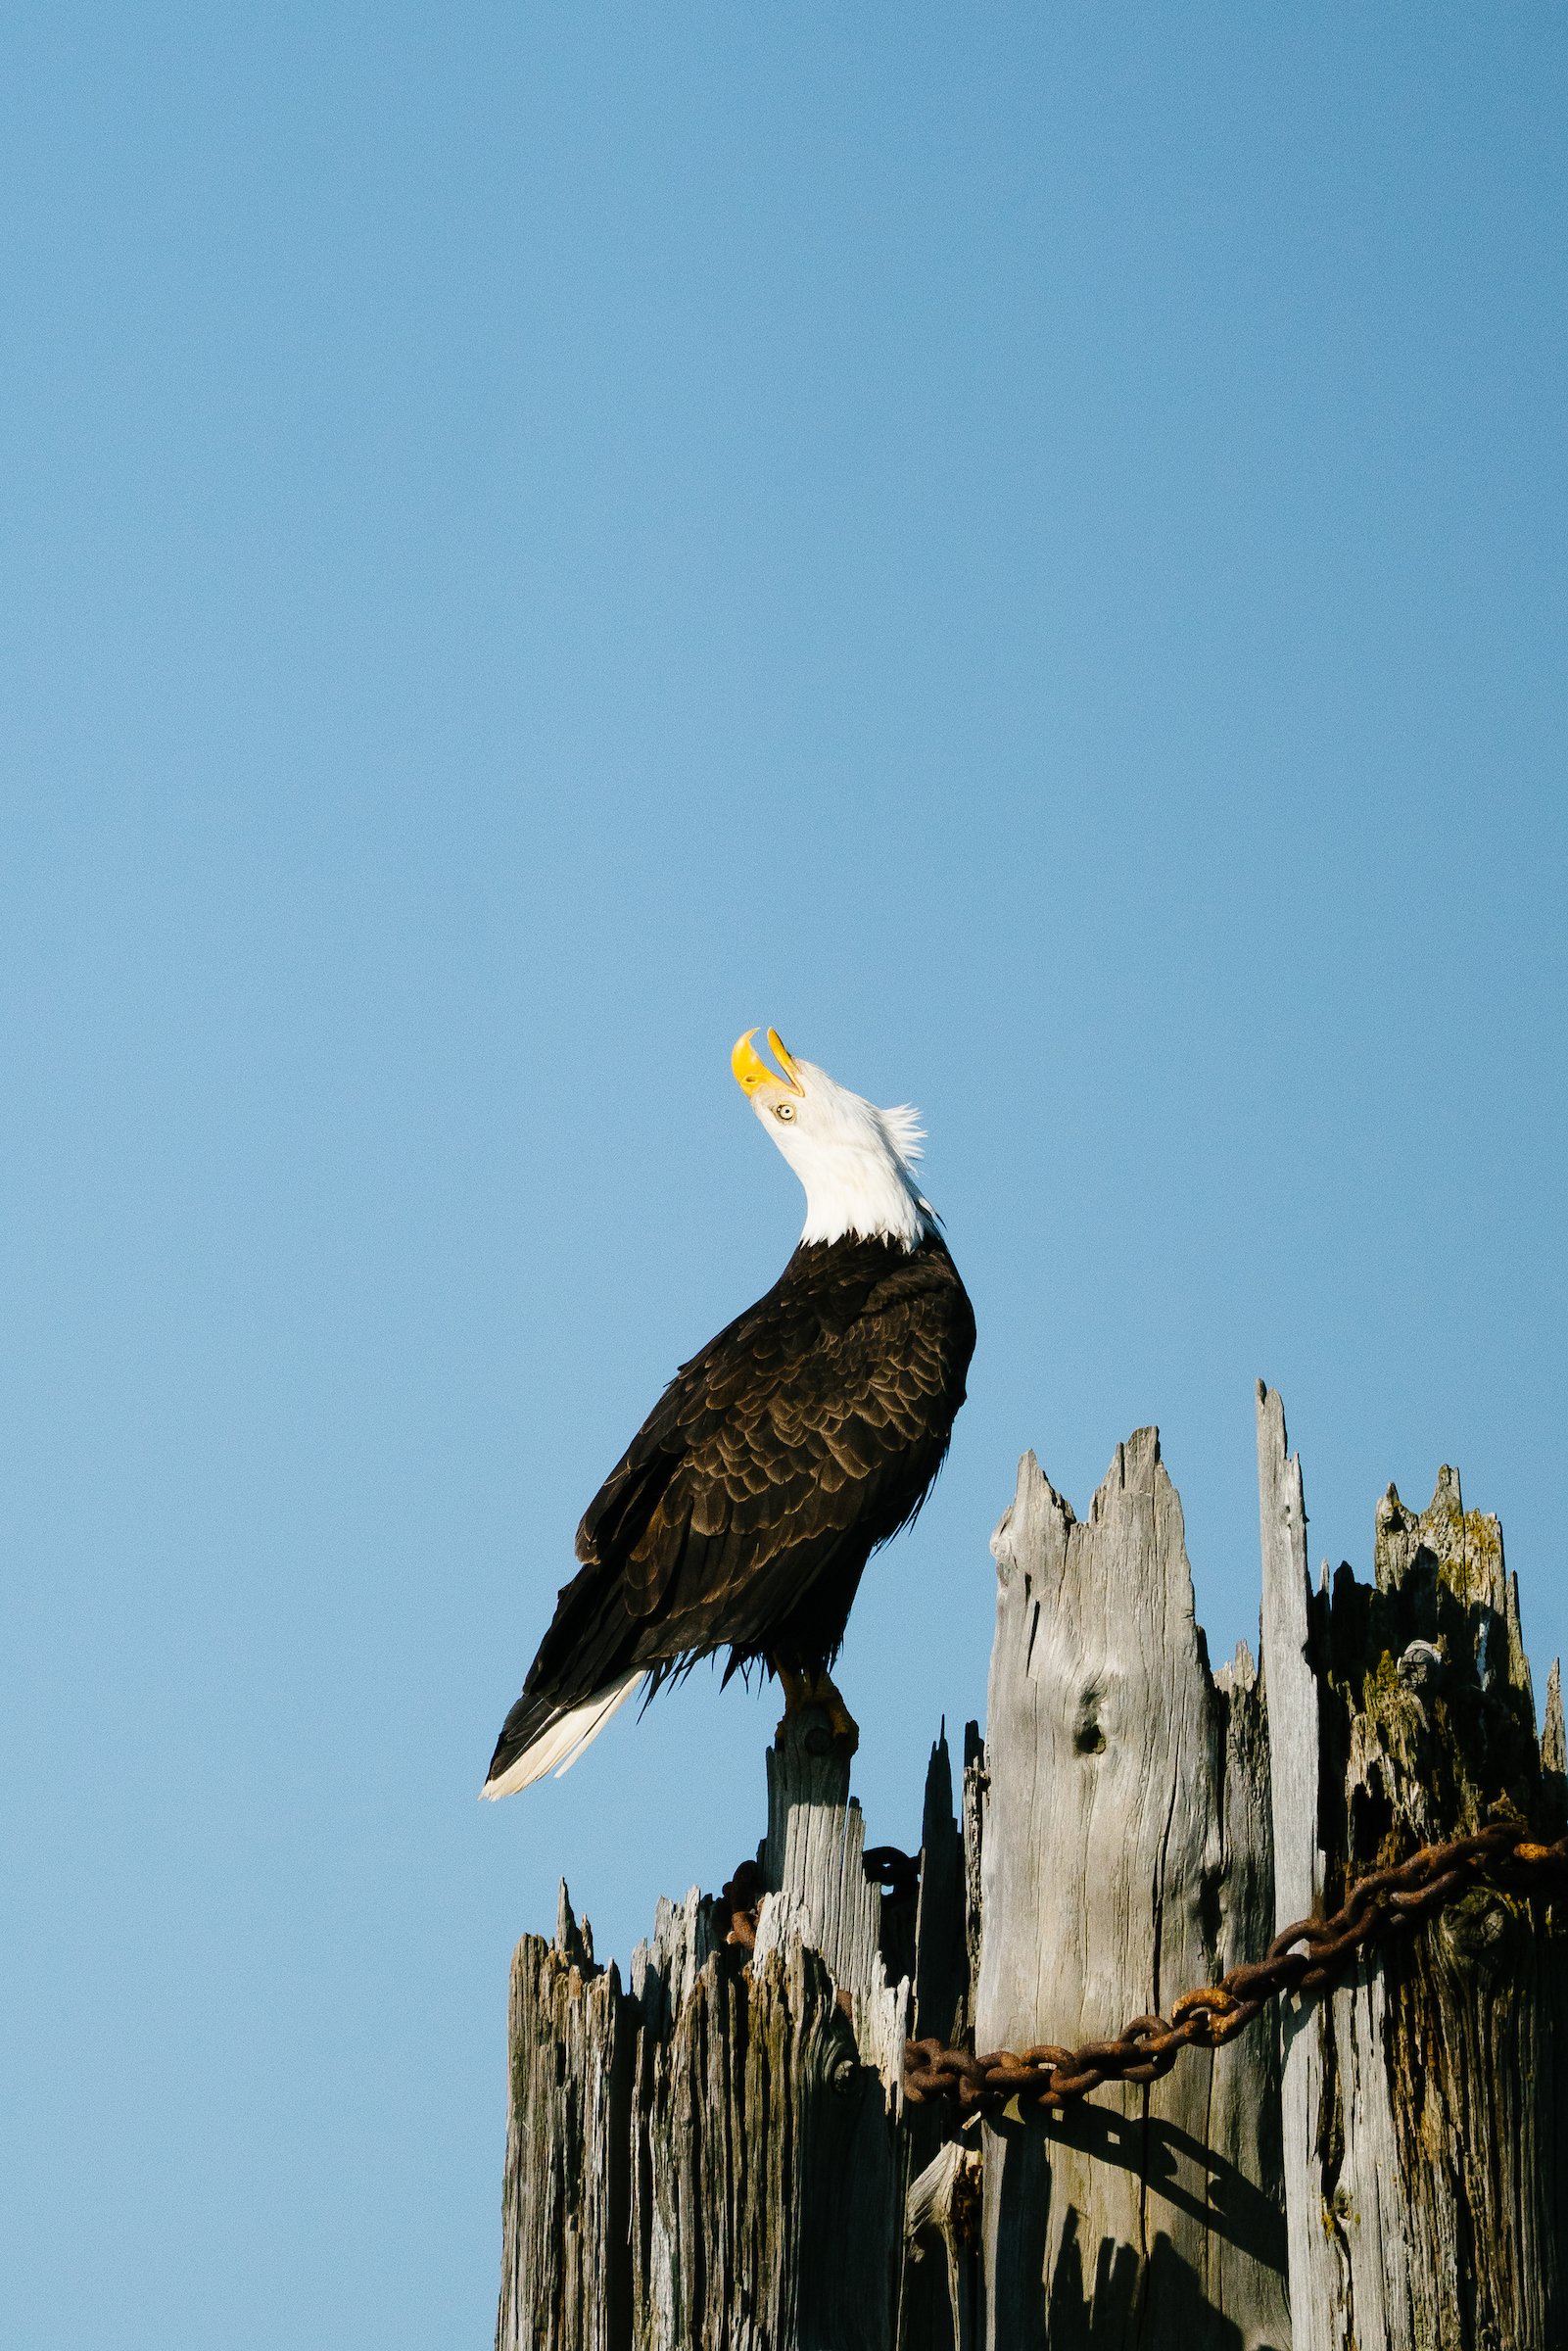 Viewing the bald eagles on the Nooksack River